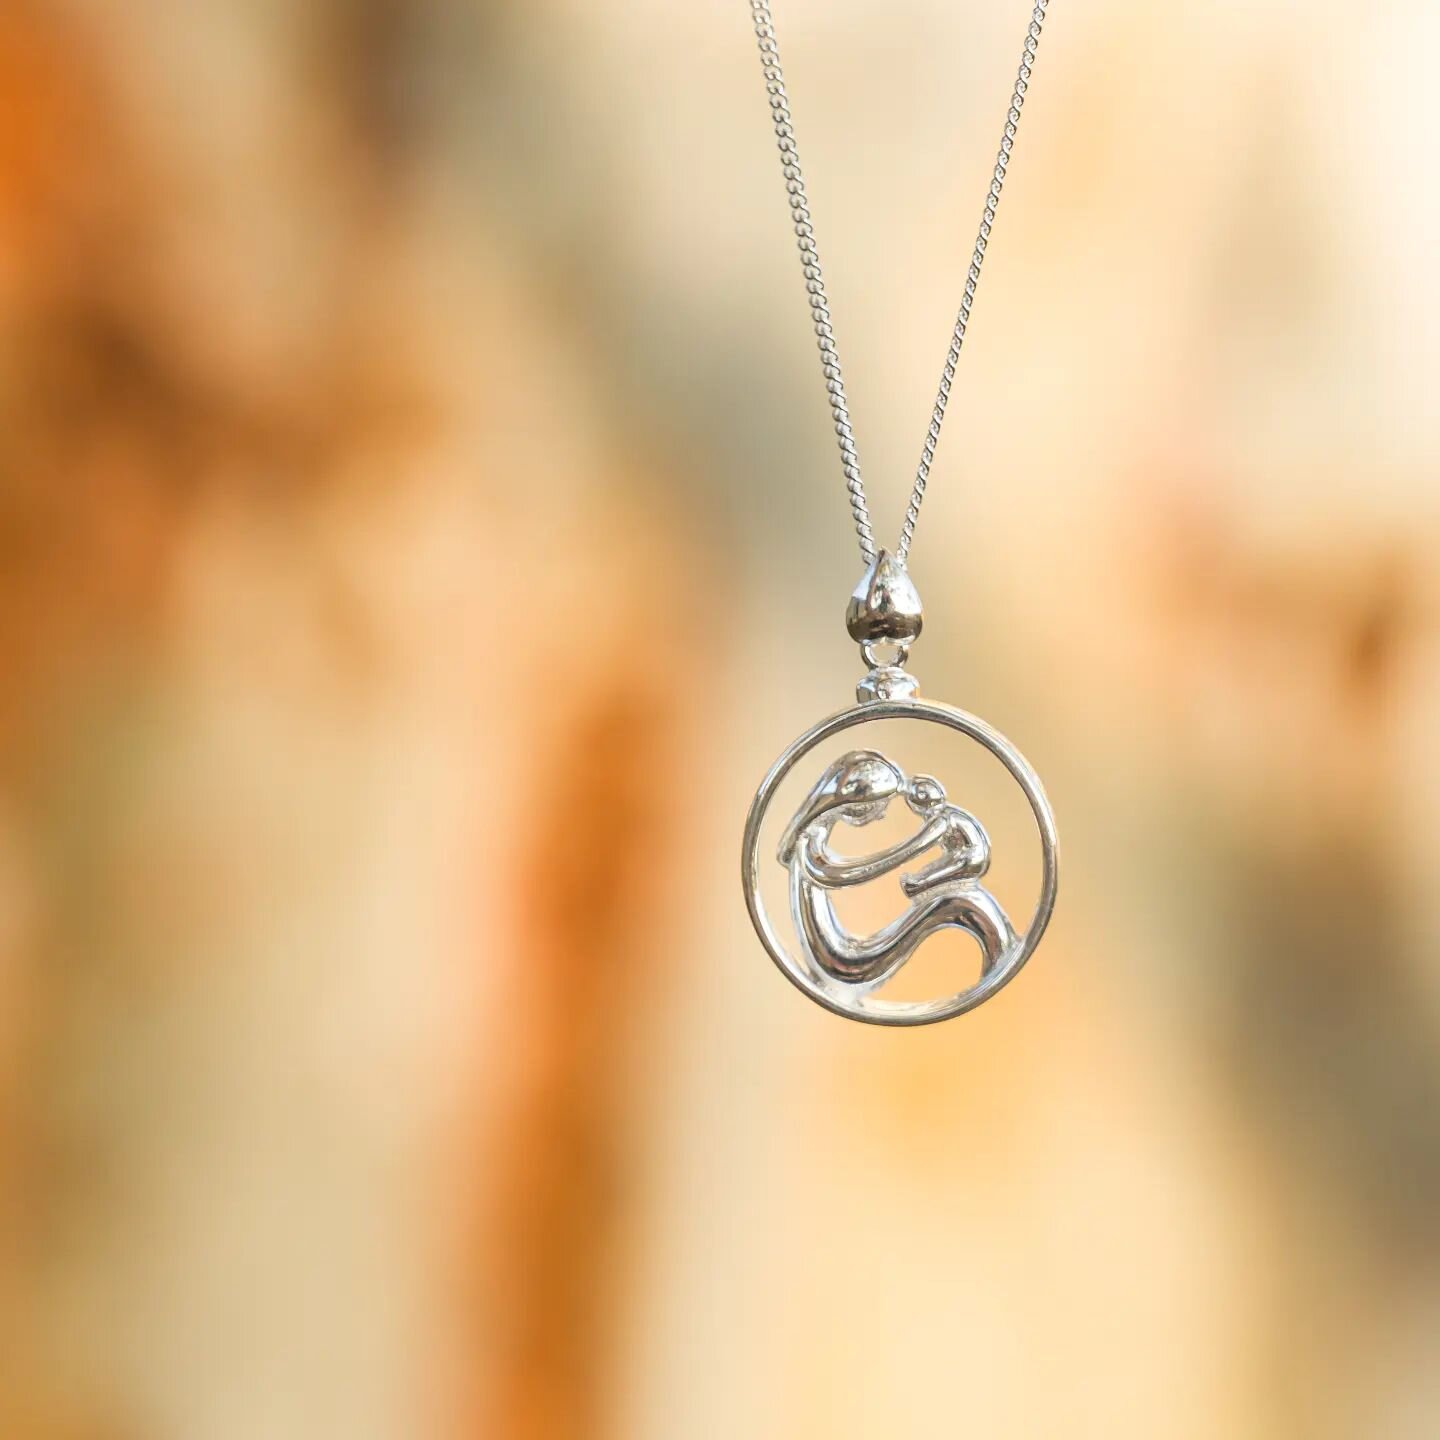 🌸✨ Celebrating the timeless bond between mother and child this Mother's Day! 💖 

Our sterling silver mother and baby pendant captures the beauty of that precious connection. Show mom some love with a gift that's as special as she is. 

Soon to be r